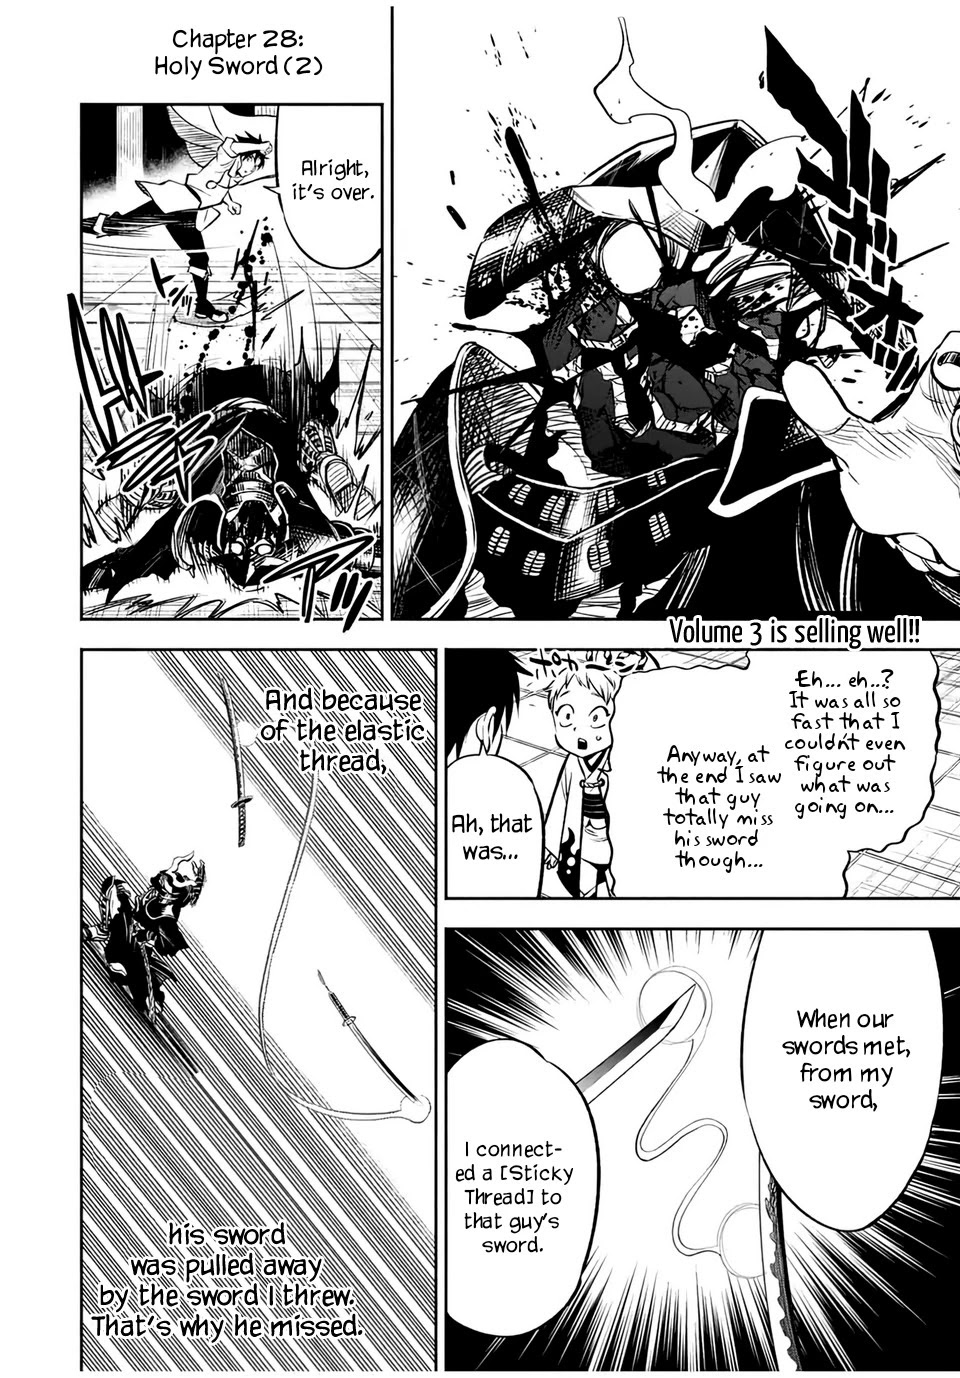 The Unfavorable Job [Appraiser] Is Actually The Strongest Chapter 28.2: Holy Sword (2) - Picture 2